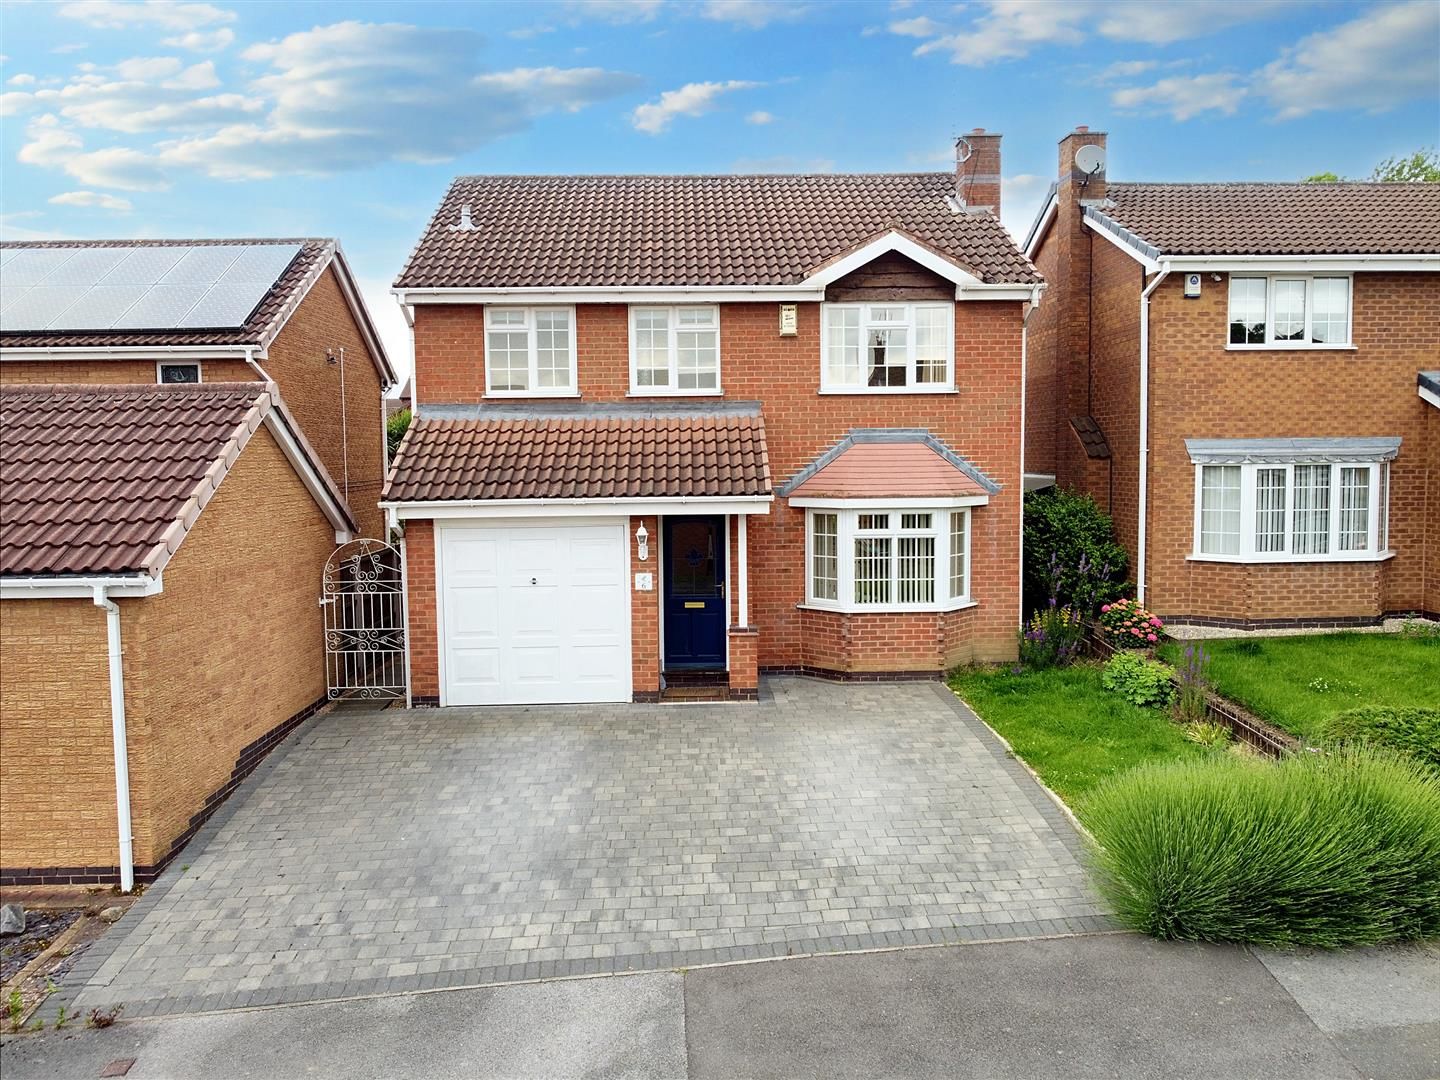 Wychwood Drive, Trowell, Nottingham, NG9 3RB